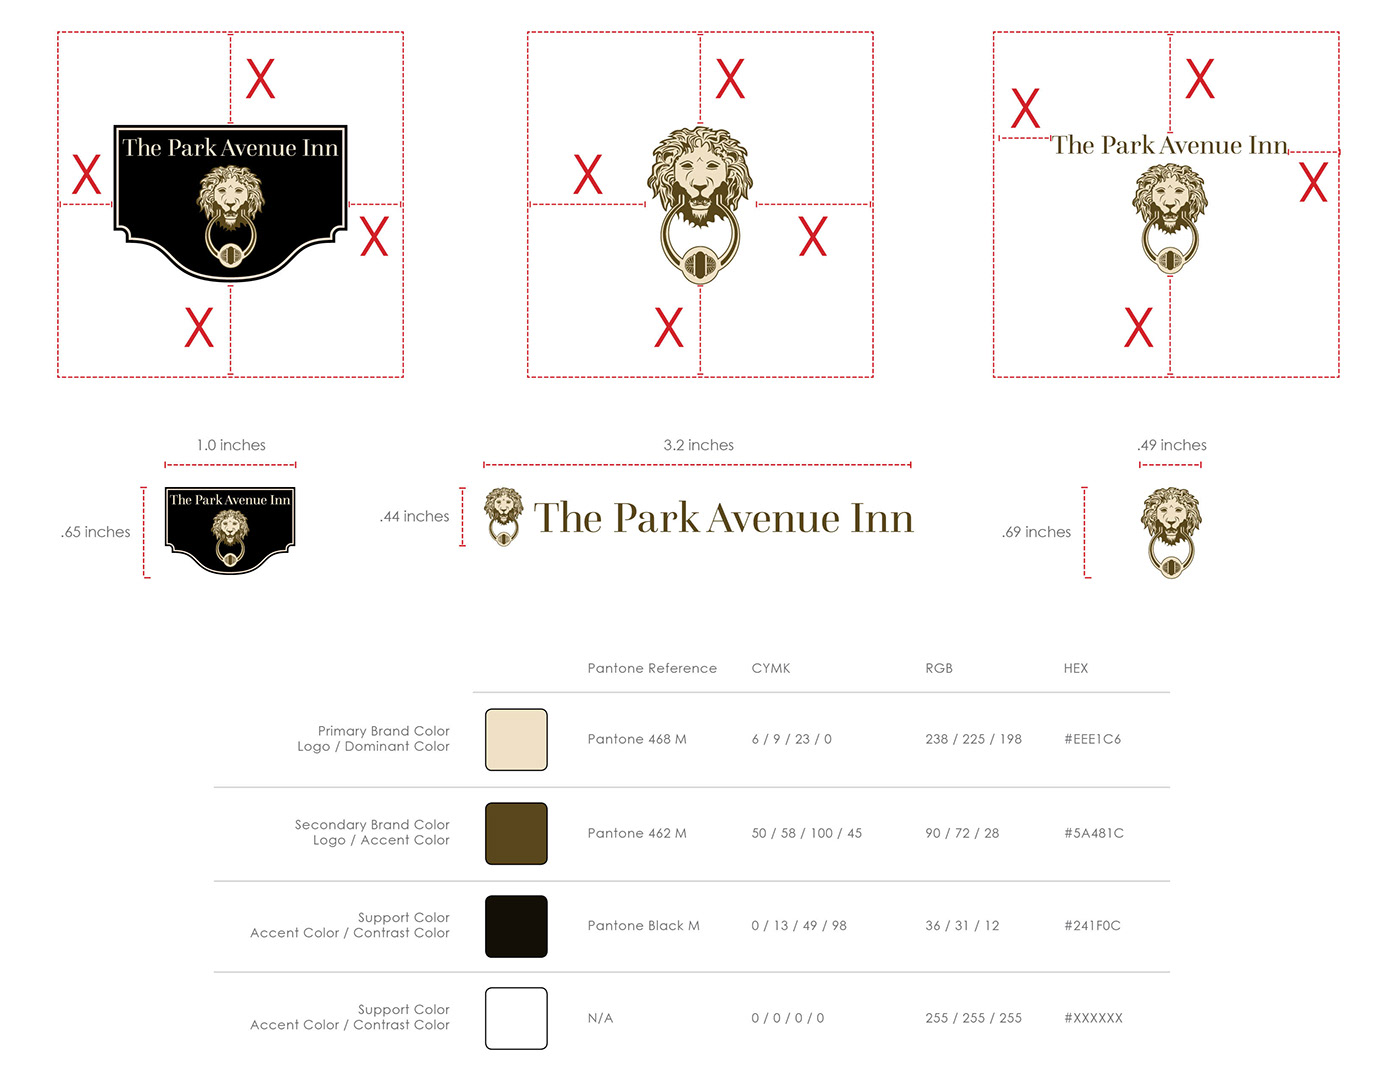 This is The Park Avenue Inn's style guide and color combos.